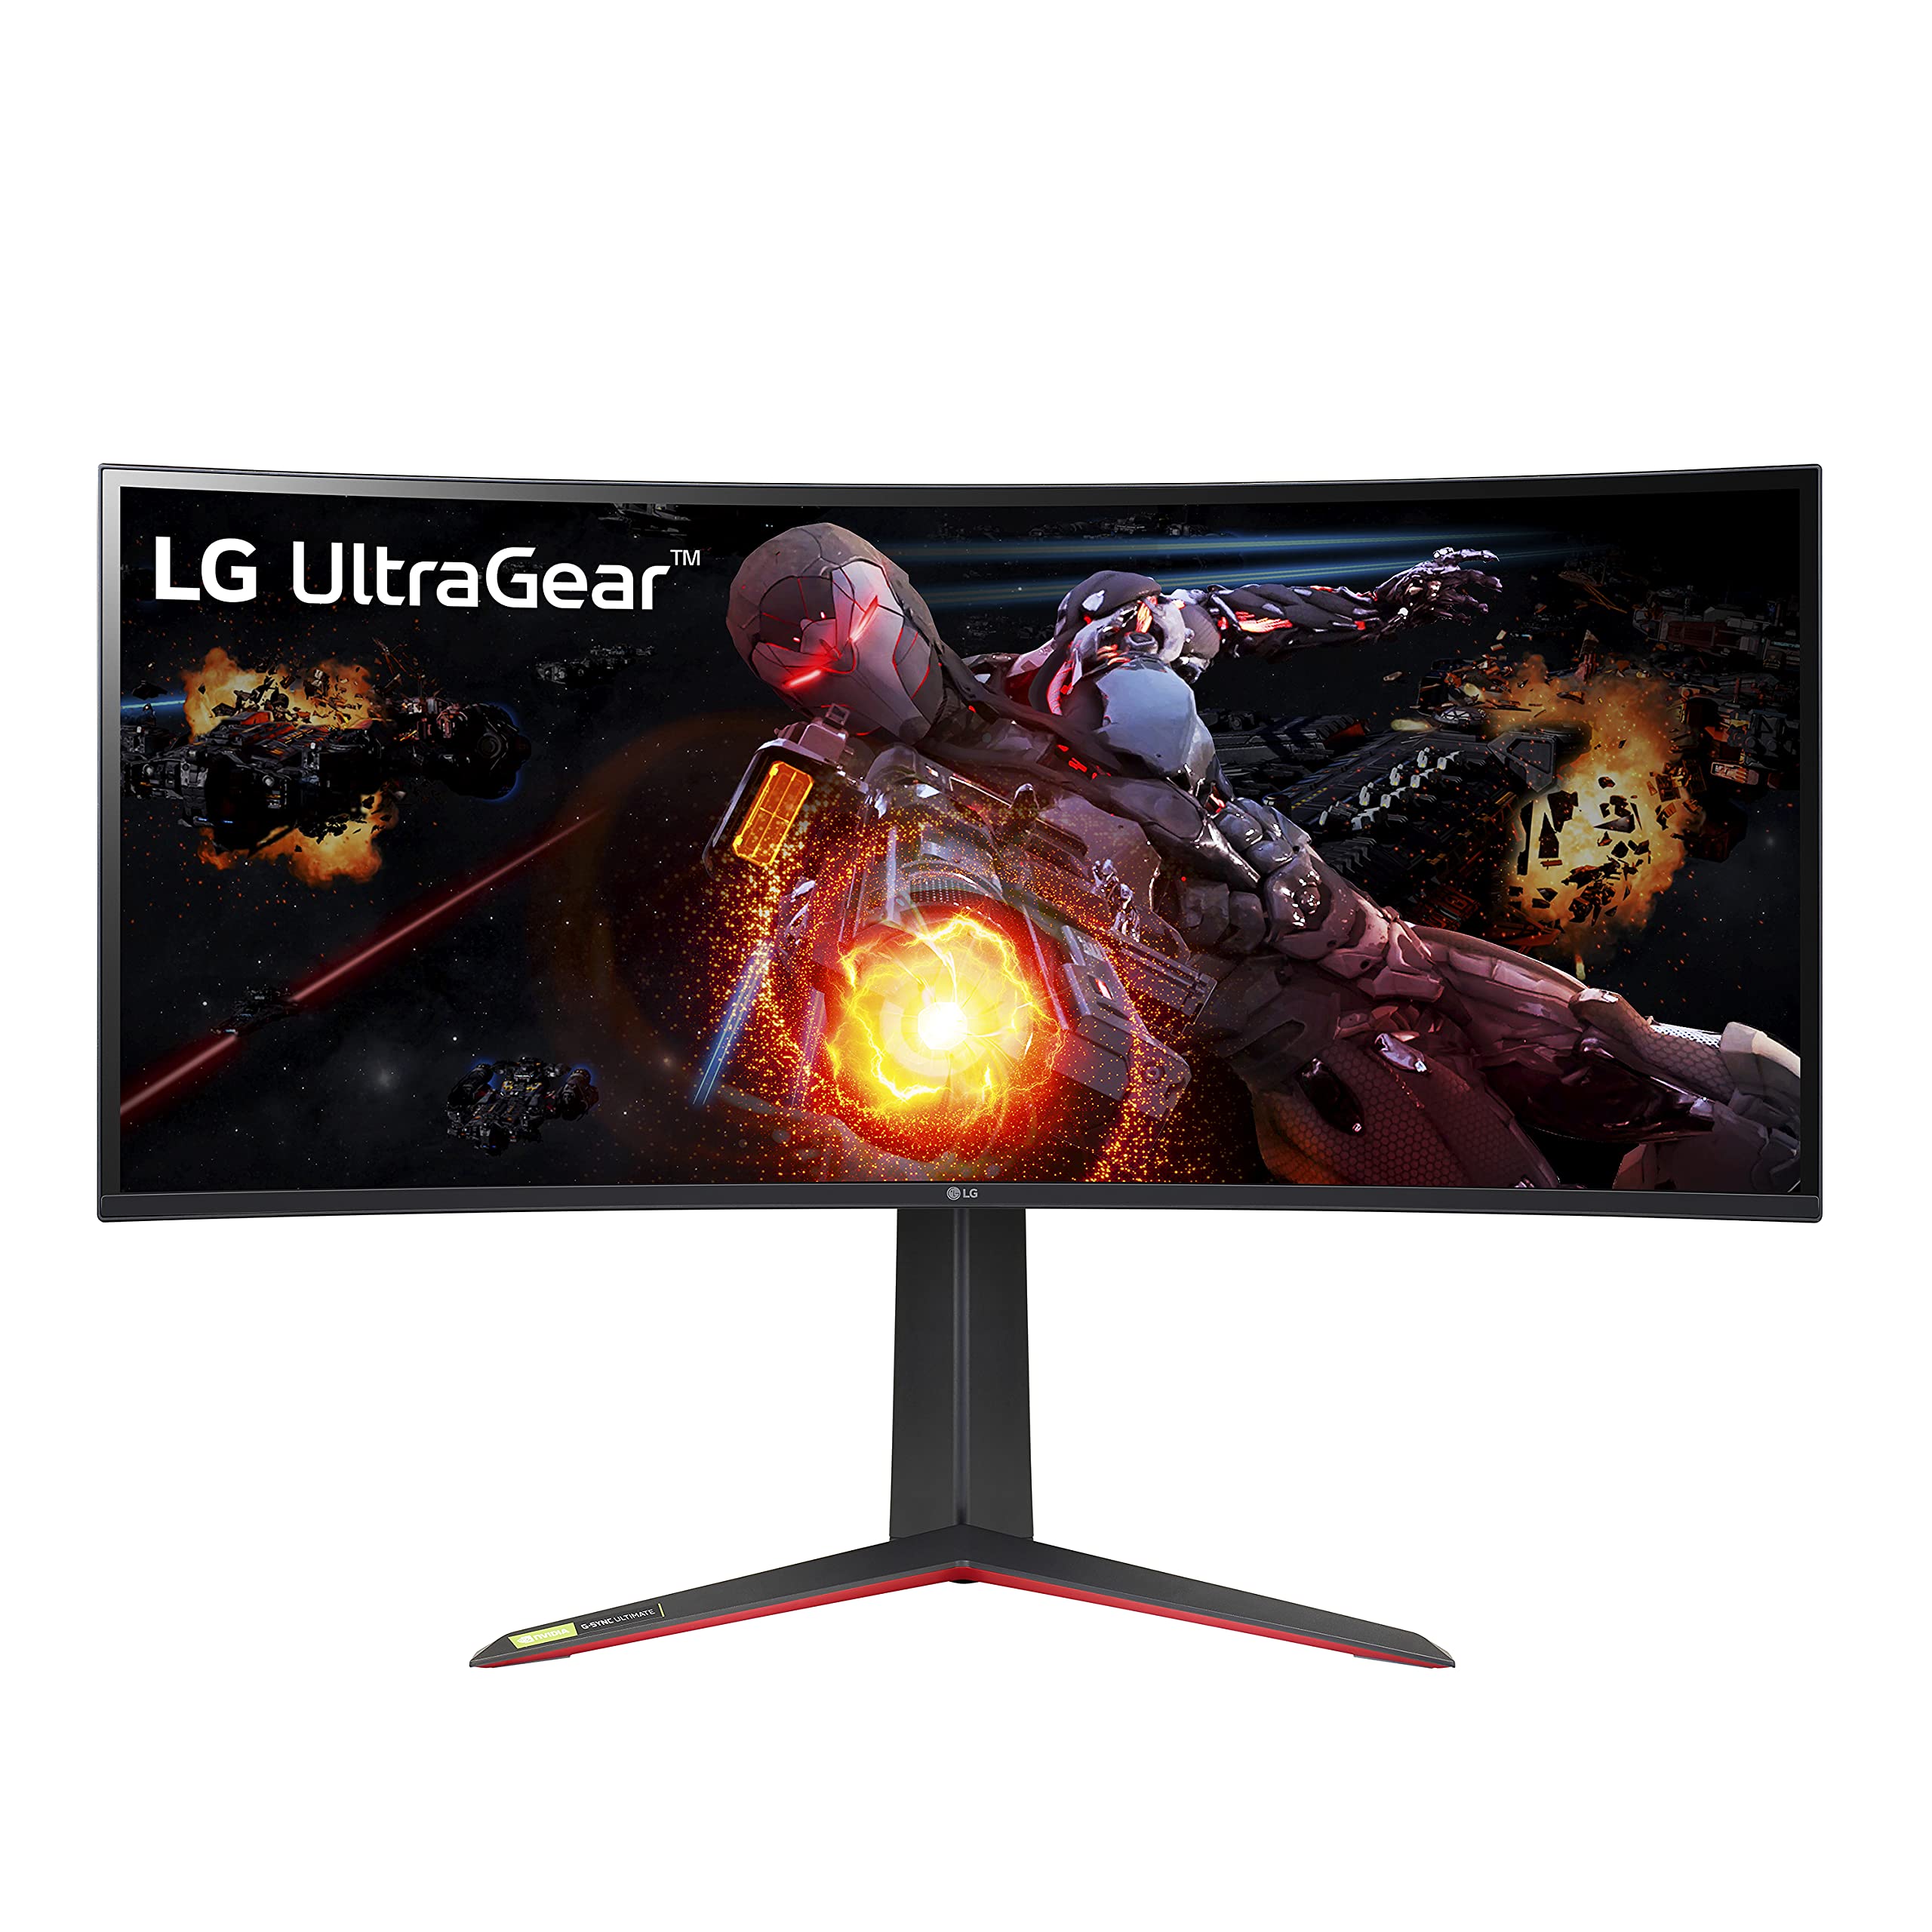 34" LG 34GP950G-B UltraGear 3440x1440 Nano IPS 144Hz UltraWide Curved Monitor w/ G-Sync Ultimate & Tilt/Height Adjustable Stand $699 + Free Shipping